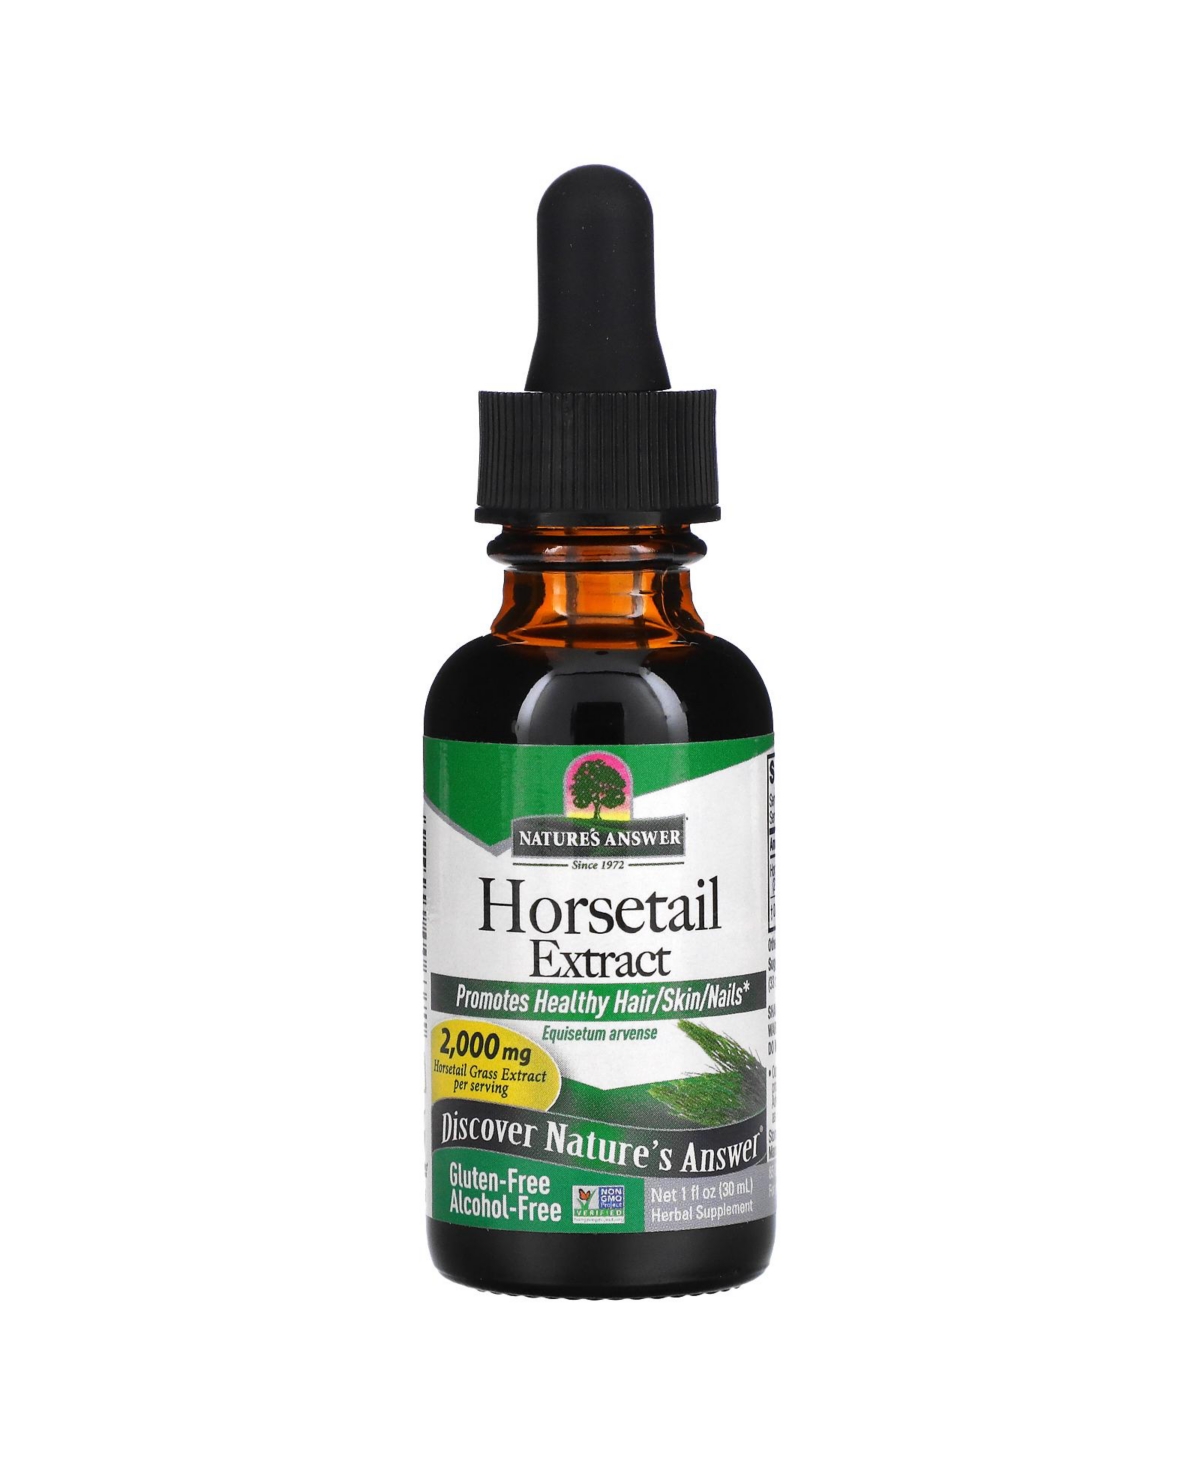 Horsetail Extract Alcohol-Free 2 000 mg - 1 fl oz (30 ml) - Assorted Pre-pack (See Table